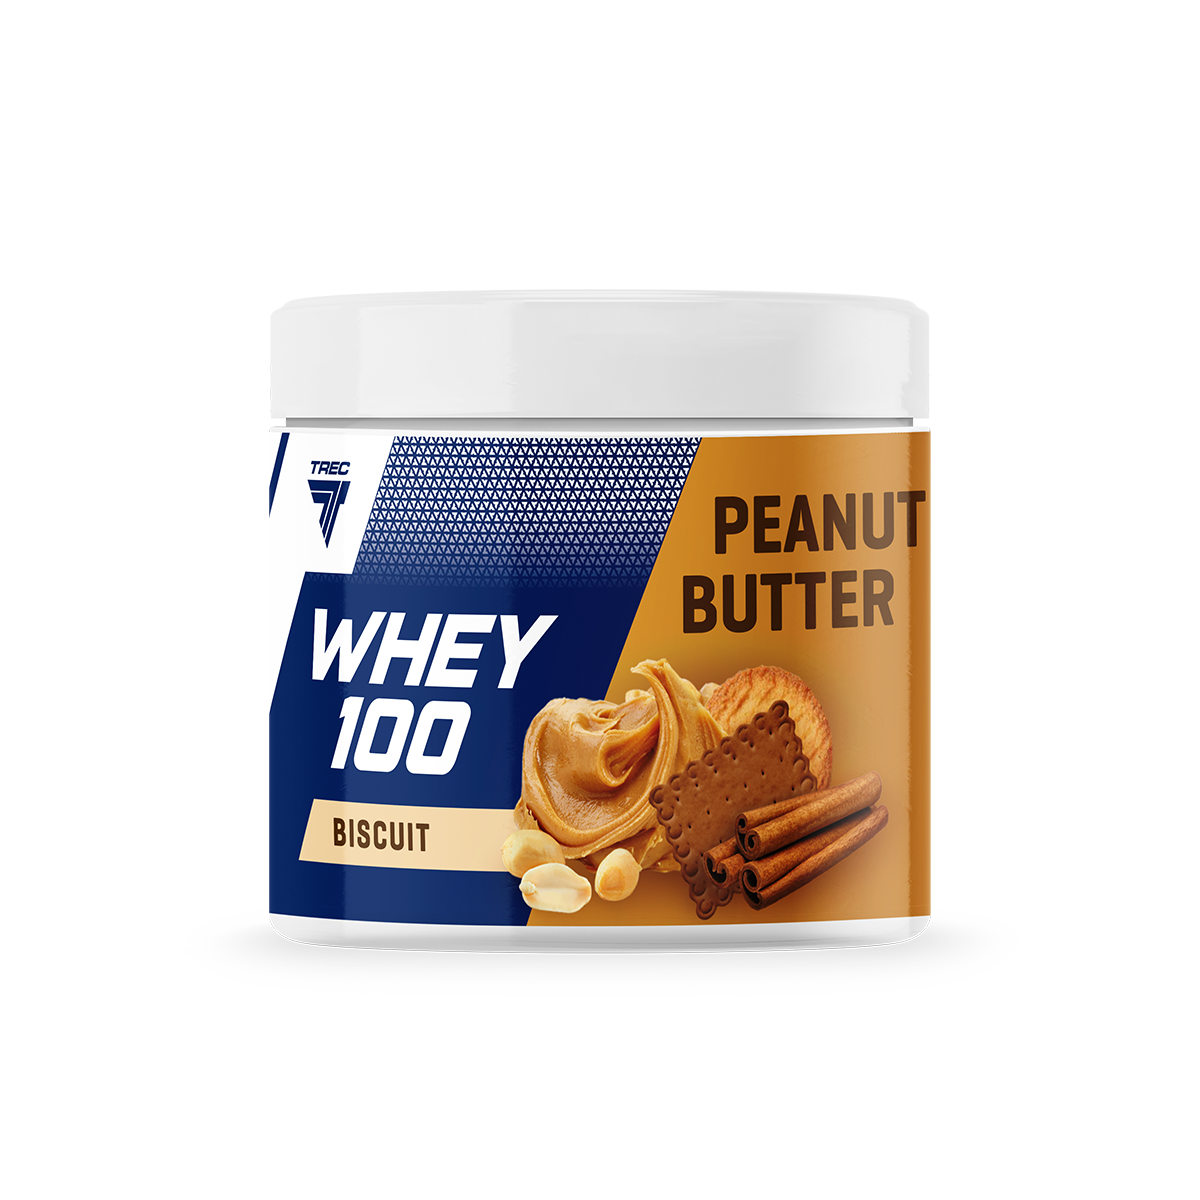 PEANUT BUTTER WHEY 100 - BBE DATE 02/24